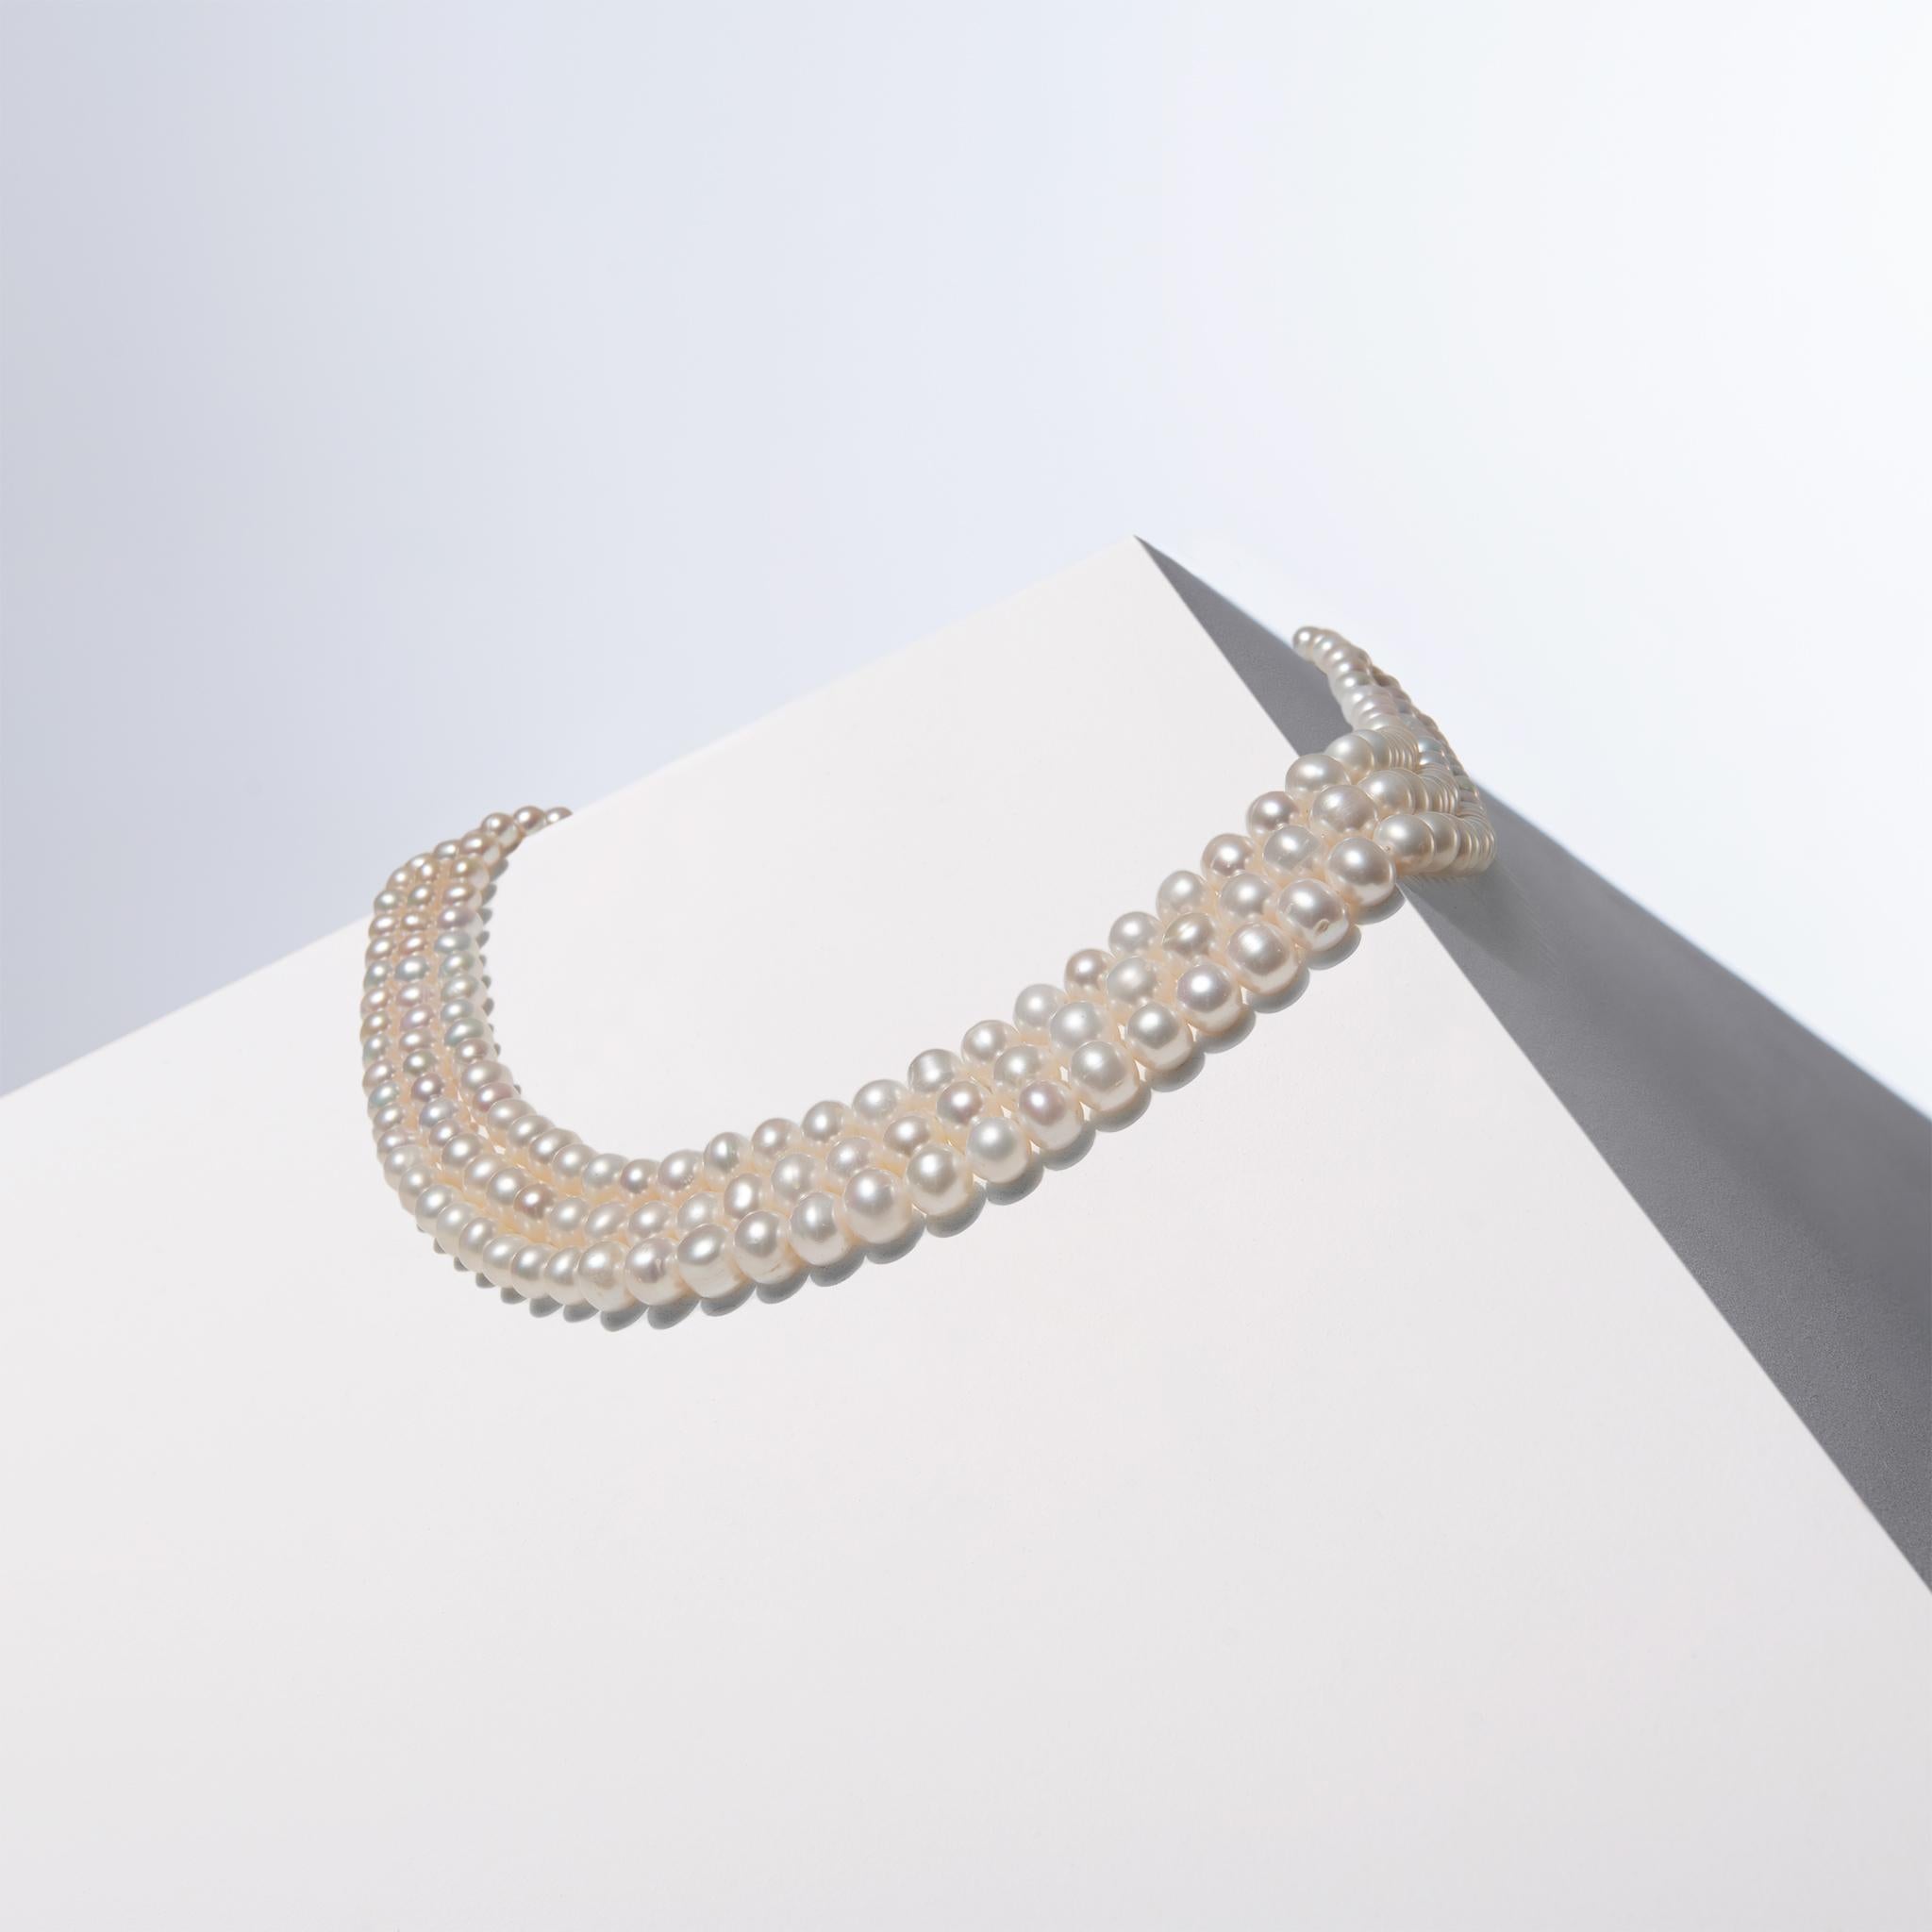 This handcrafted triple-strand pearl necklace features graduating pearls, ranging from 6mm at the ends to 9mm at the center. The intentional selection of pearls creates a textured look, enhancing depth and dimension. Wearers can choose to wear one,